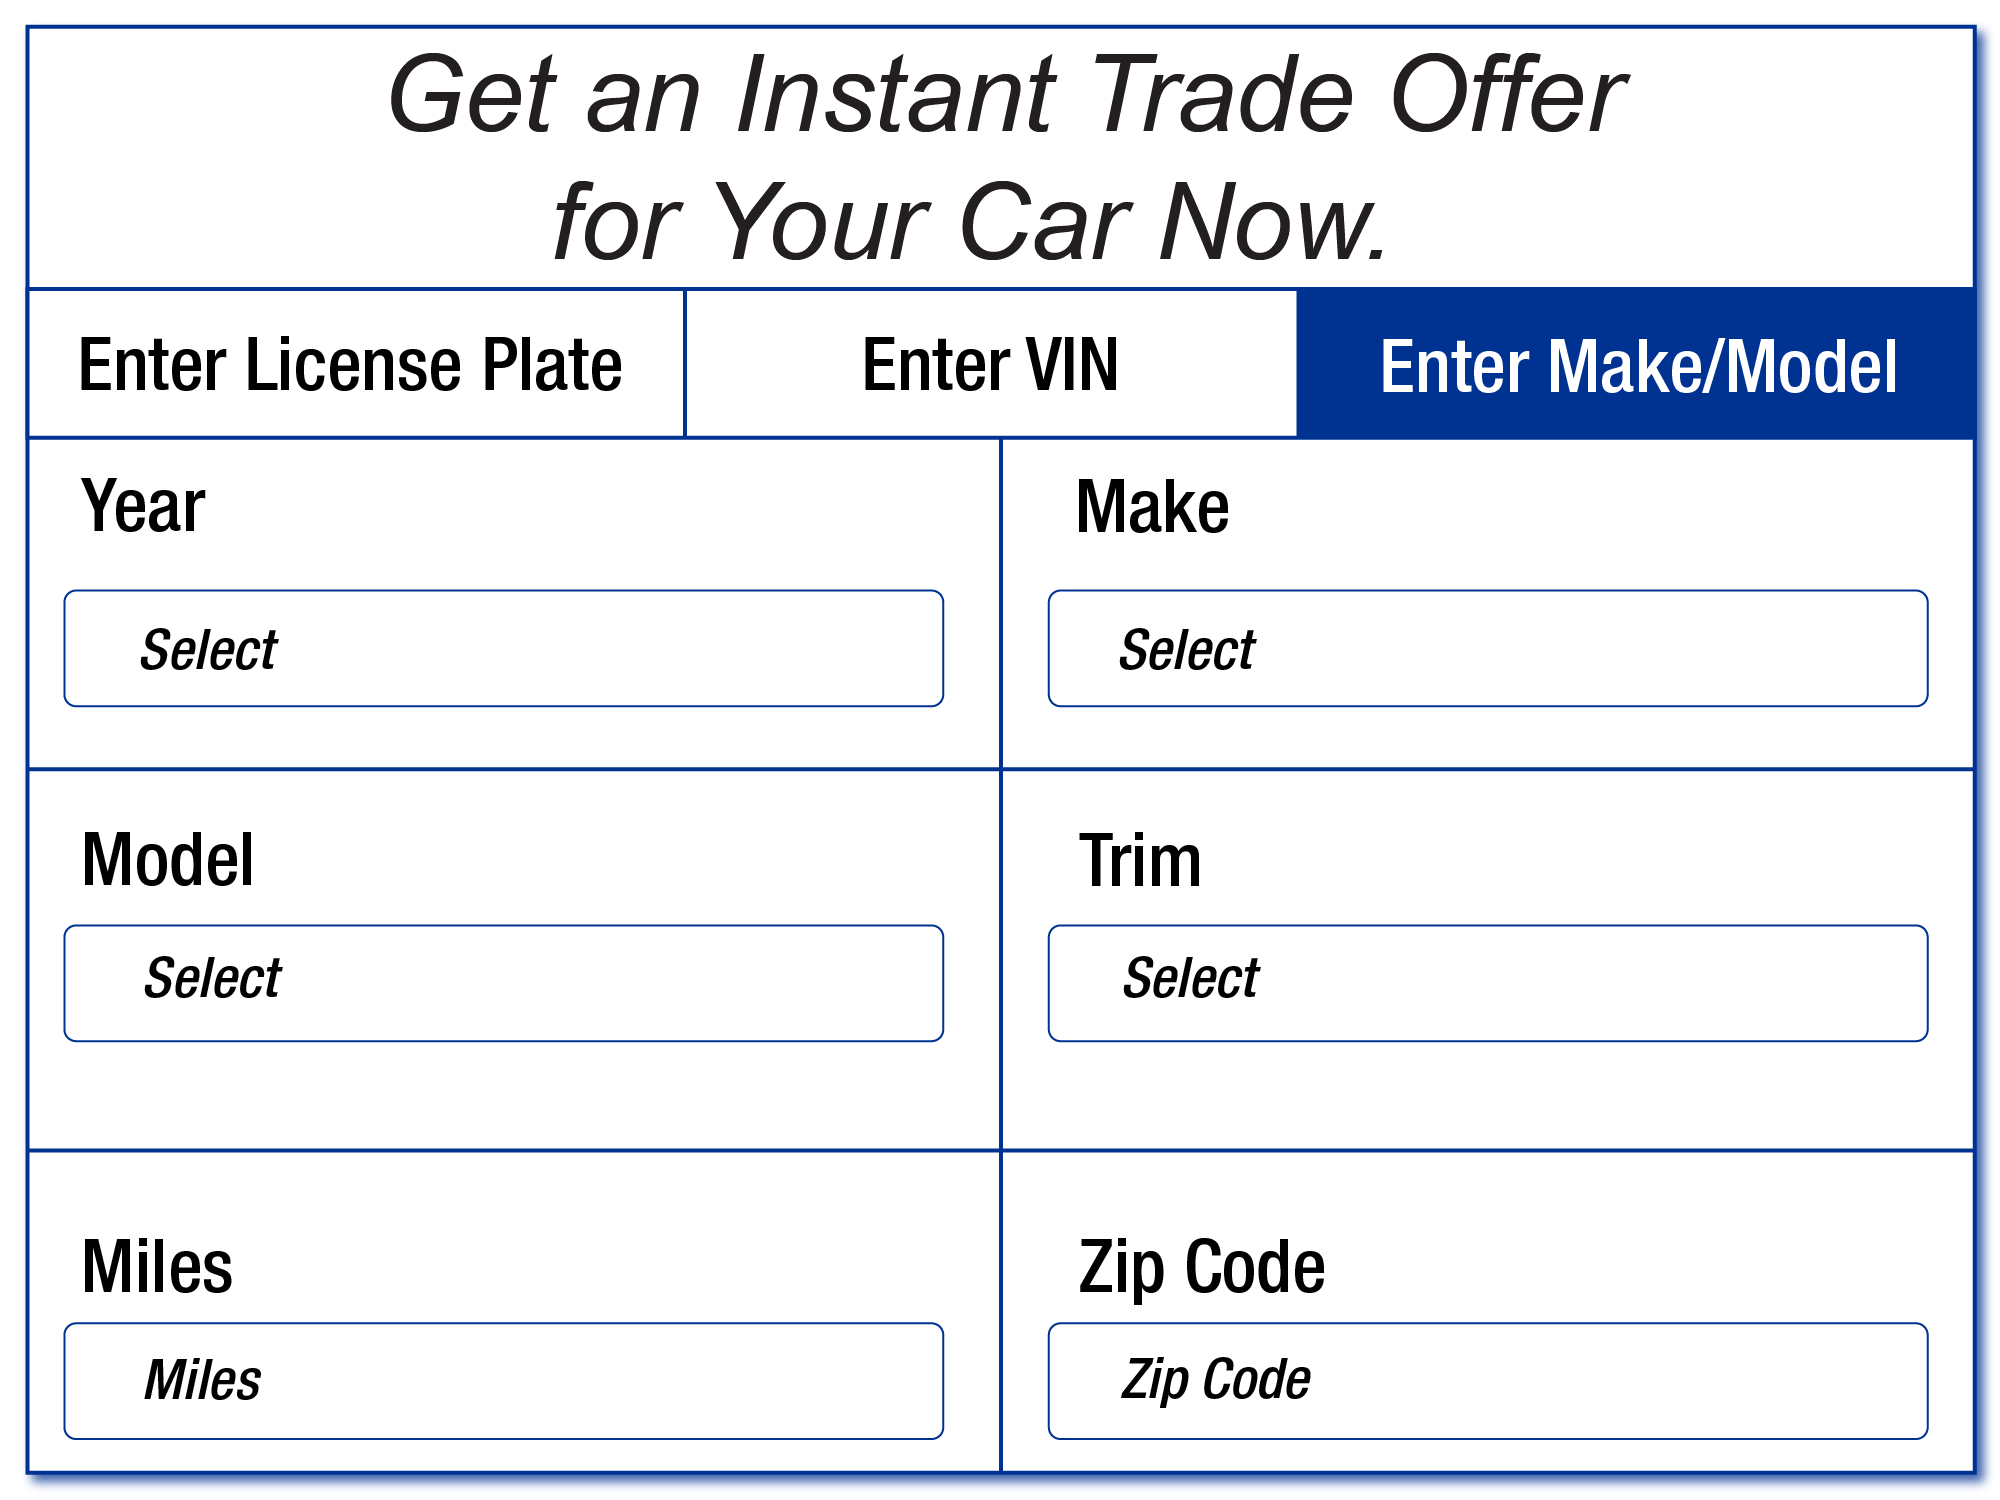 Get an instant trade offer for your car. 